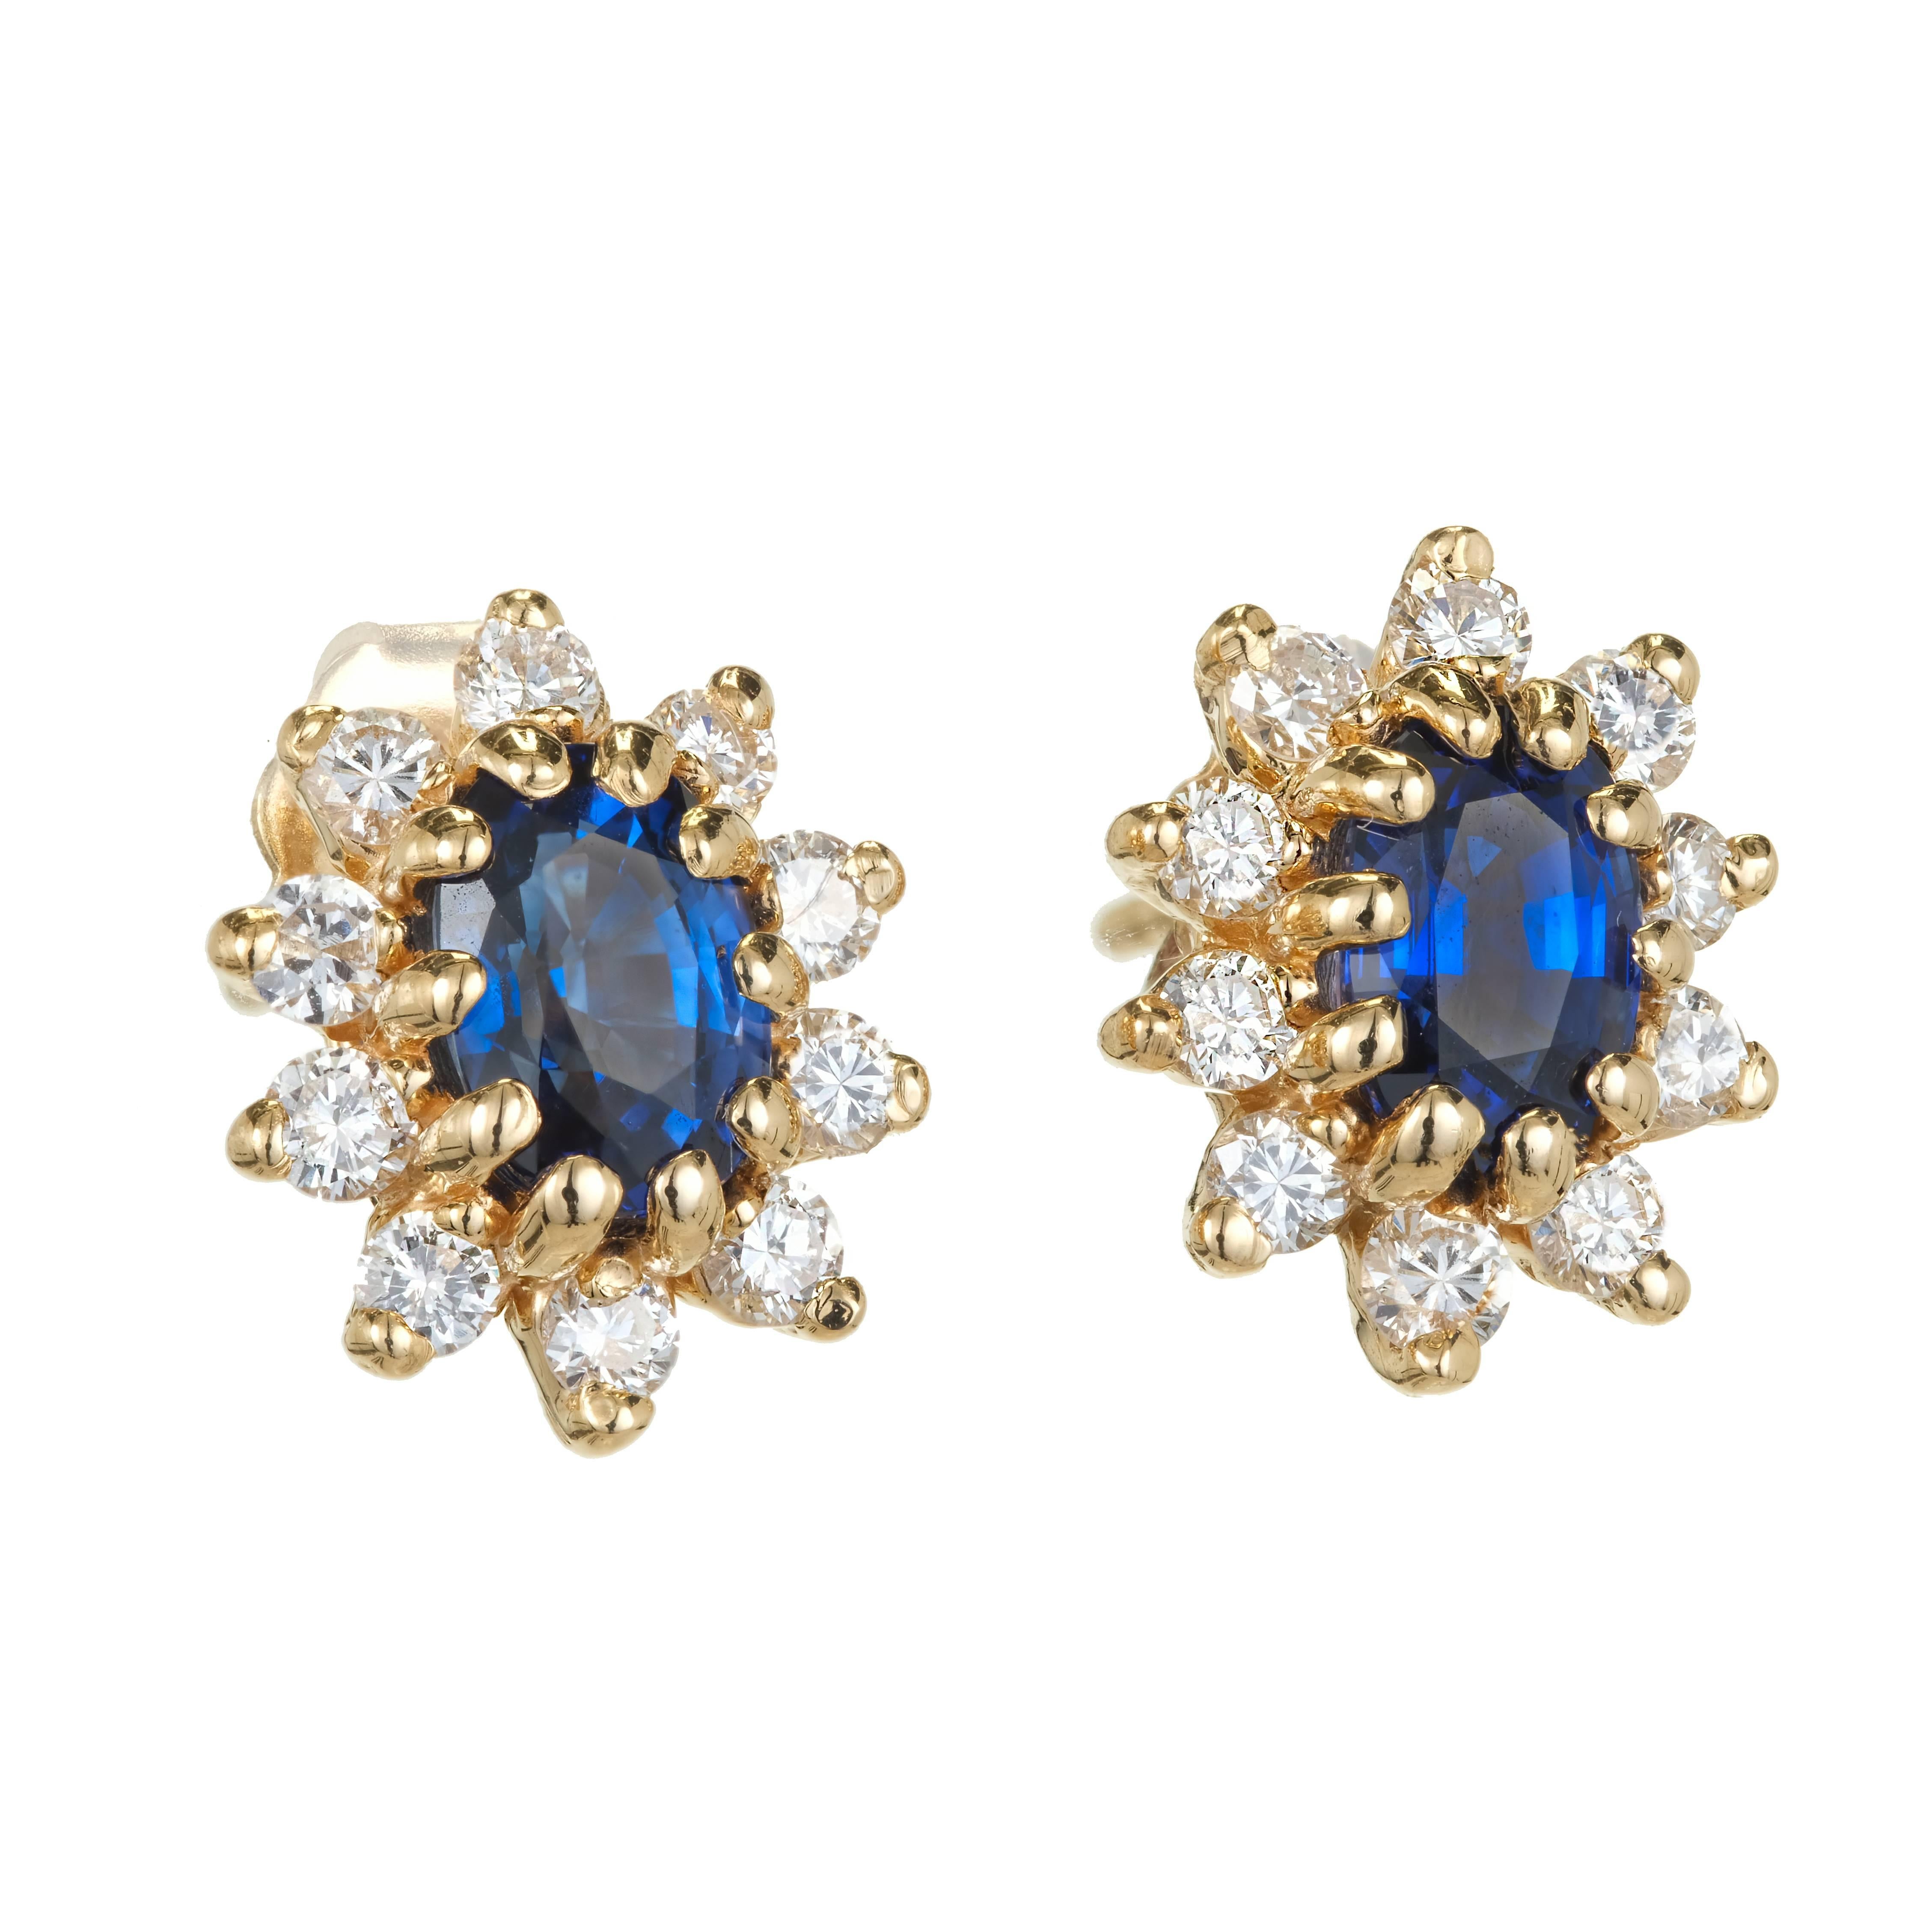 Sapphire an diamond stud earrings. 2 oval sapphires totaling 1.20cts set in 14k yellow gold settings each with a halo of round full cut diamonds. 

2 oval blue Sapphires, approx. total weight 1.20cts, 6.16 x 4.3 x 2.89mm
20 round full cut Diamonds,